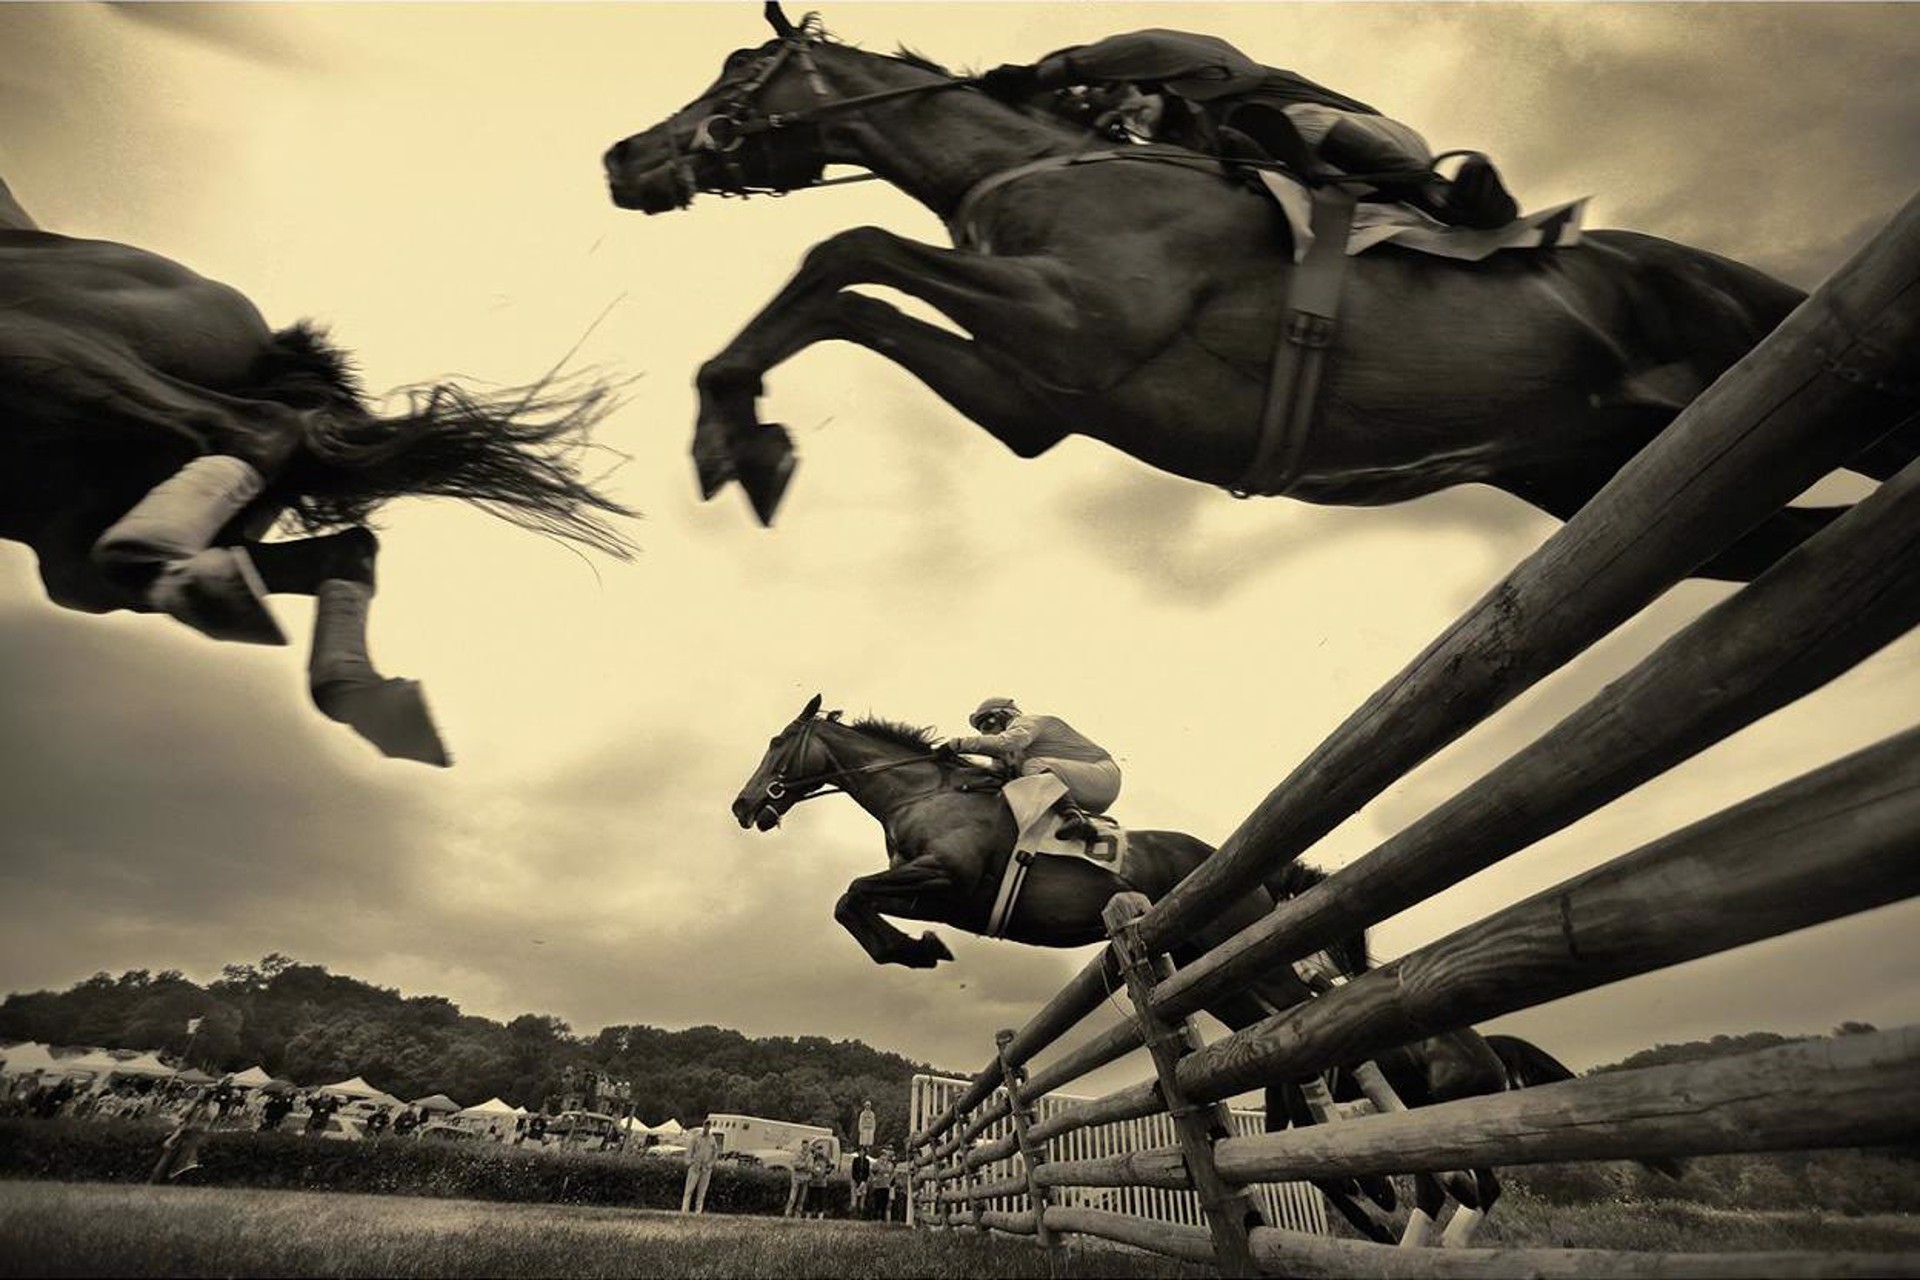 Iroquois Steeplechase, Nash. TN by Brown W. Cannon III